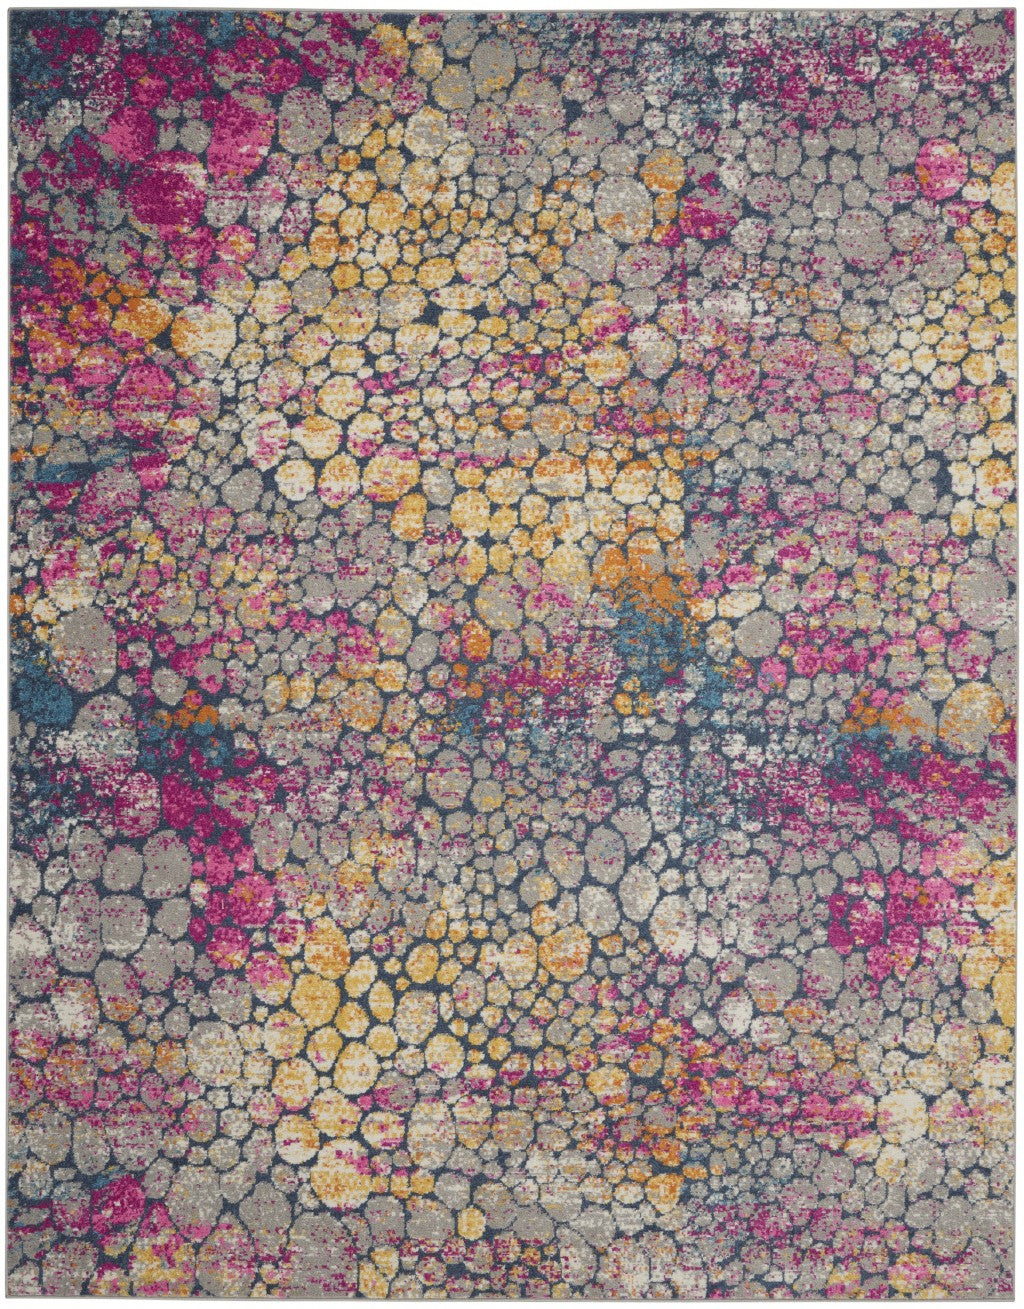 2’ X 6’ Yellow And Pink Coral Reef Runner Rug